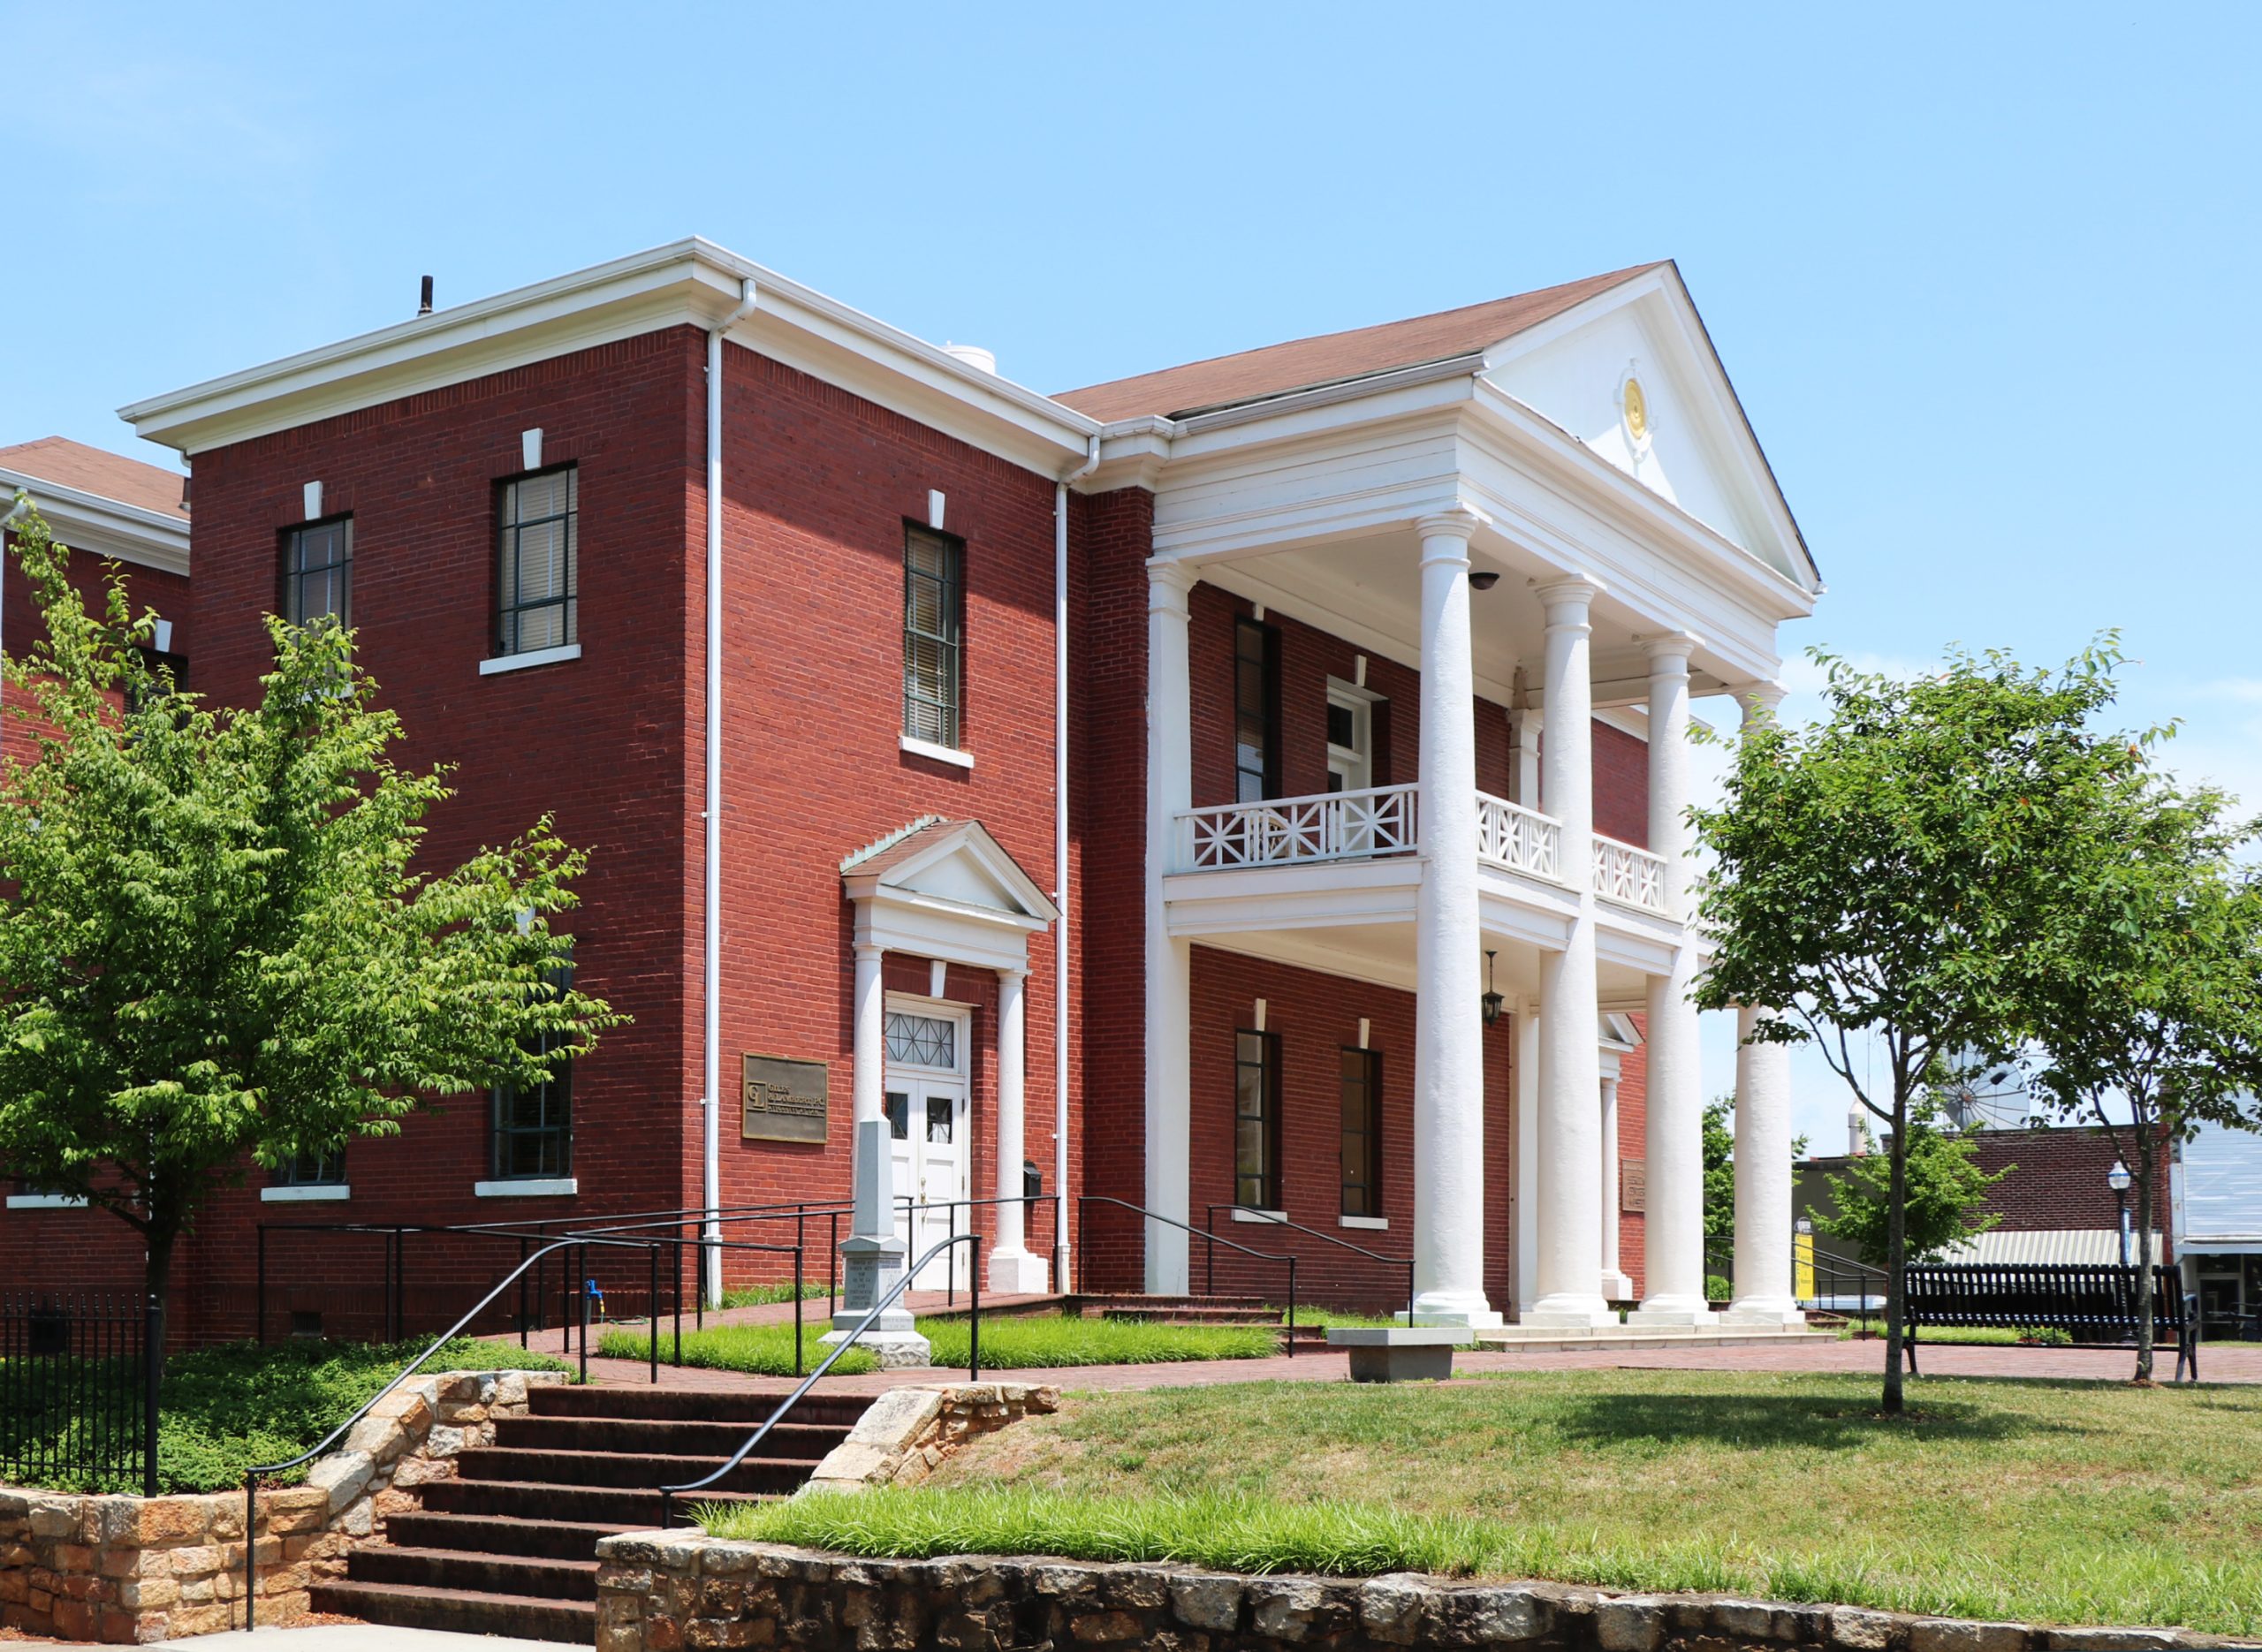 Henry County Courthouse. Photo credit: Brad McDonald/DHR, 2019